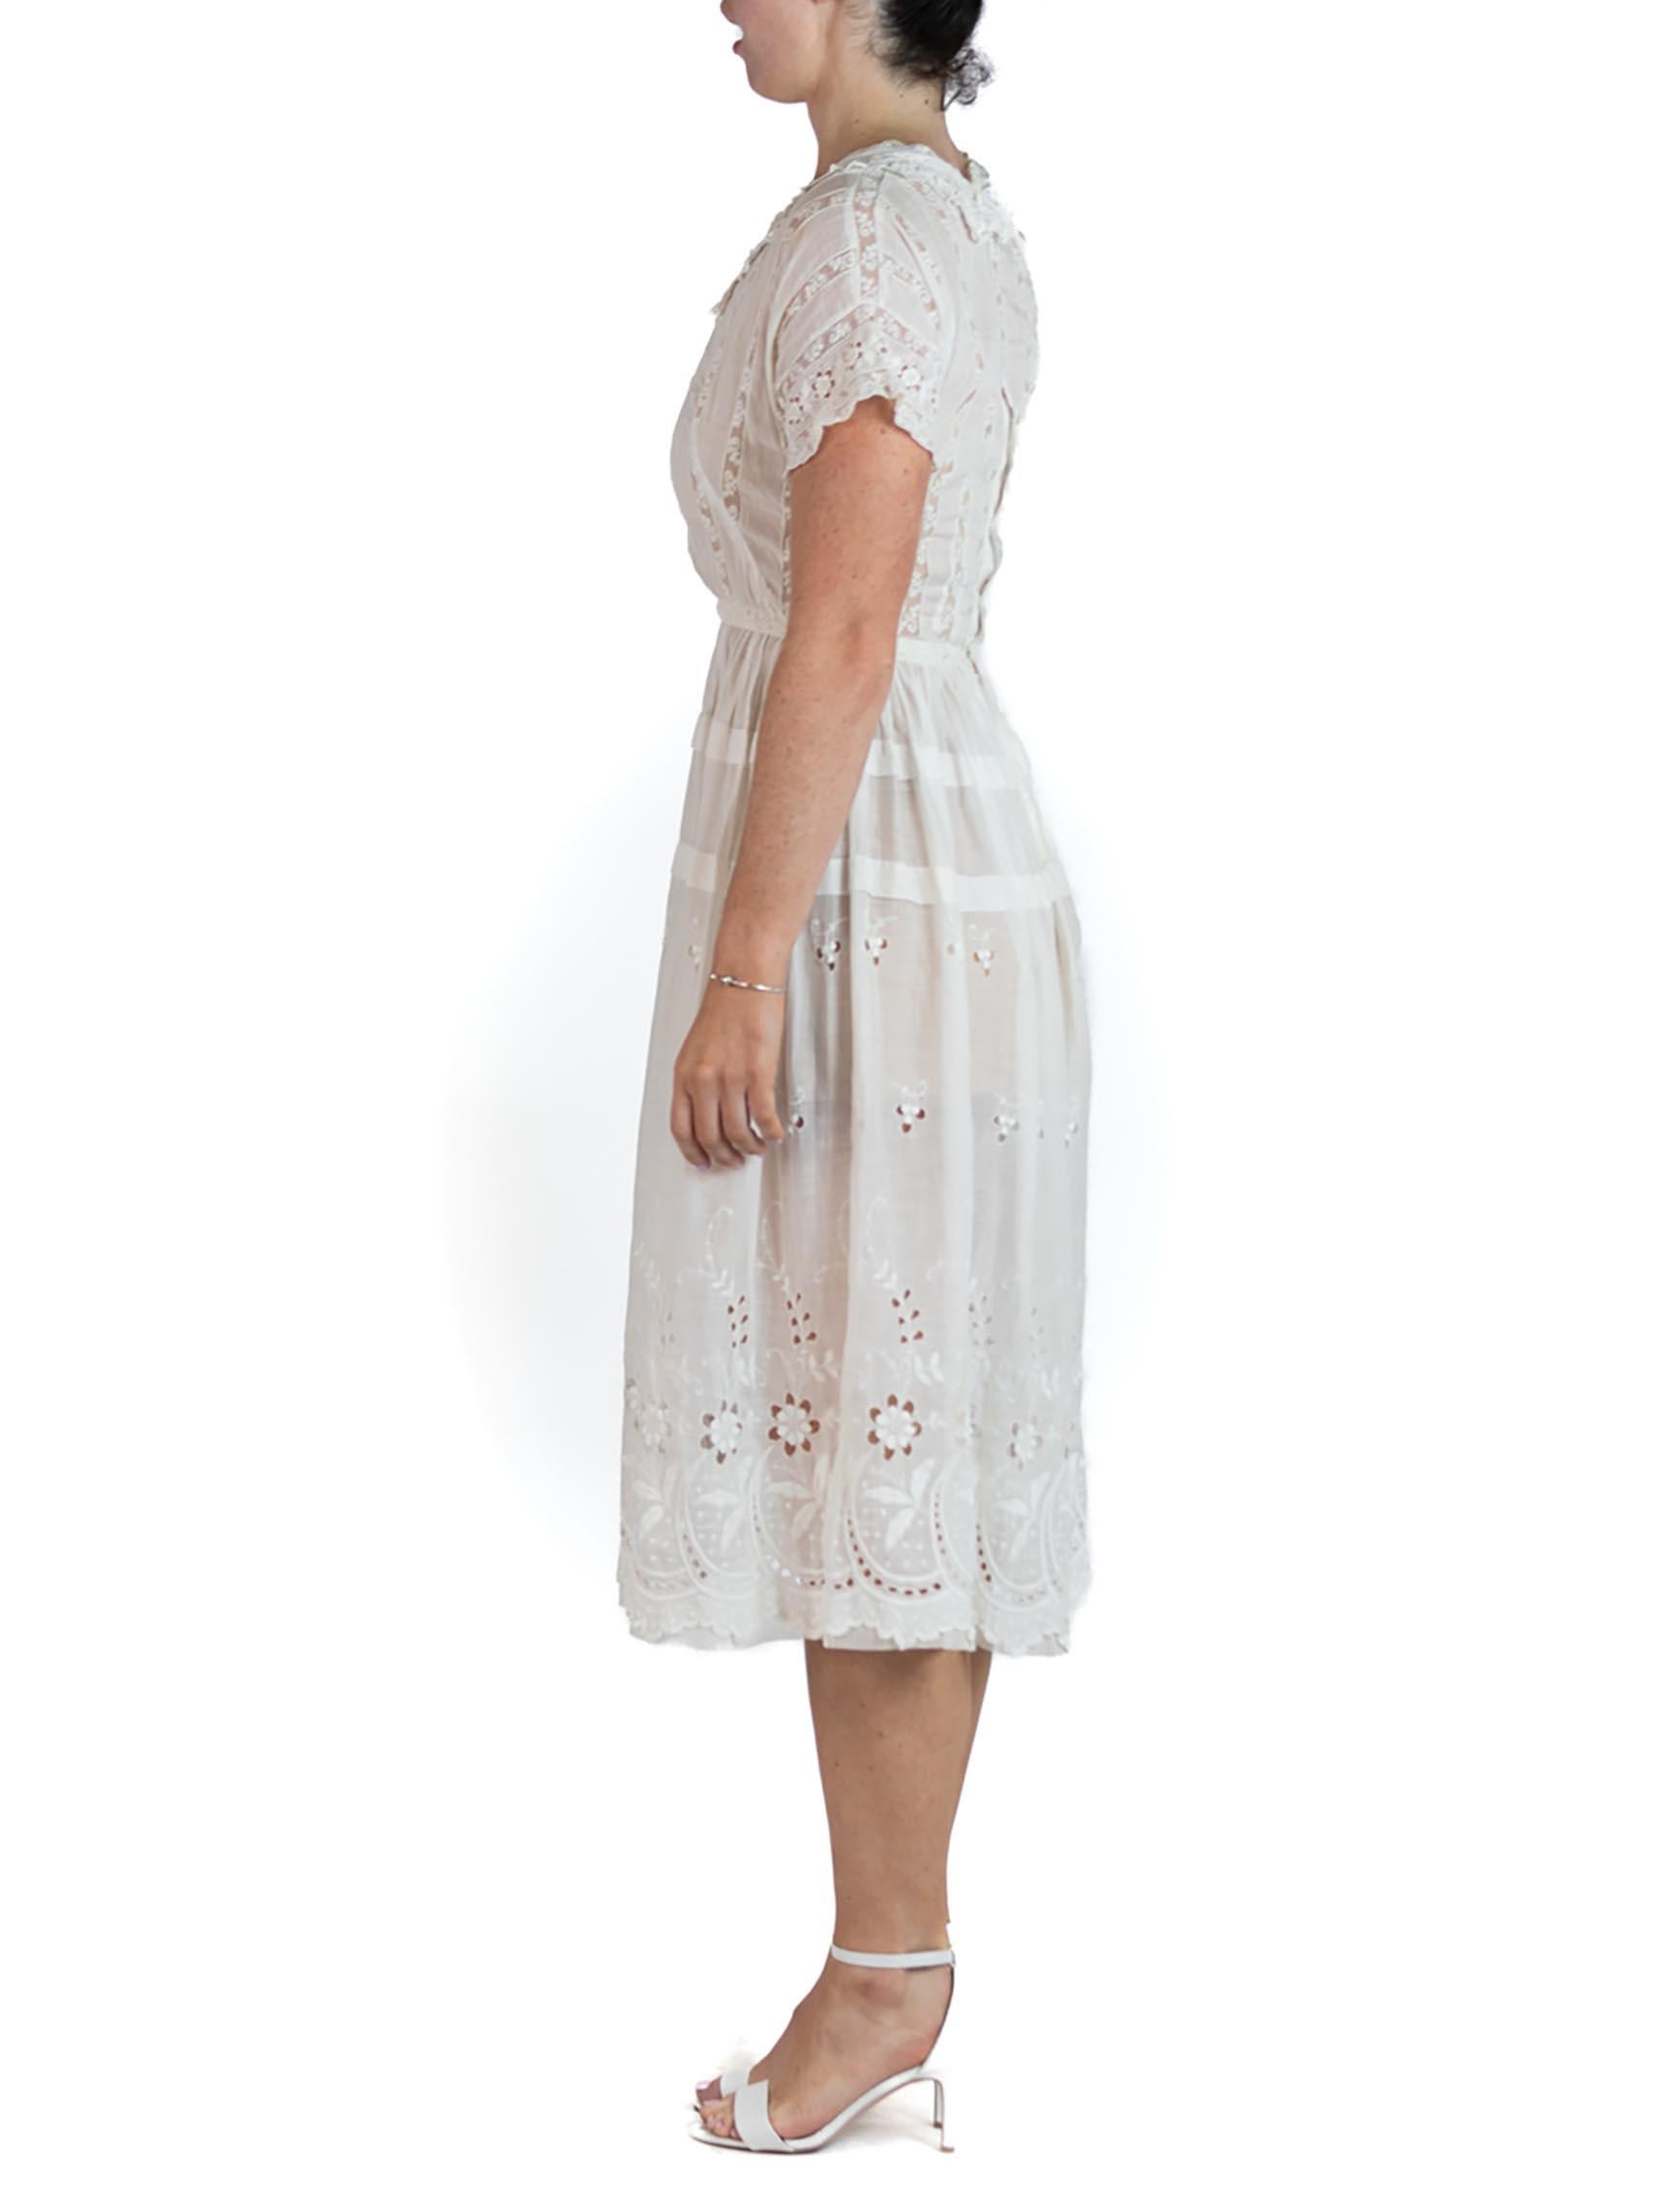 XS Waist with a 36 Bust  Edwardian White Organic Cotton Lawn Embroidered Lace Summer Tea Dress 